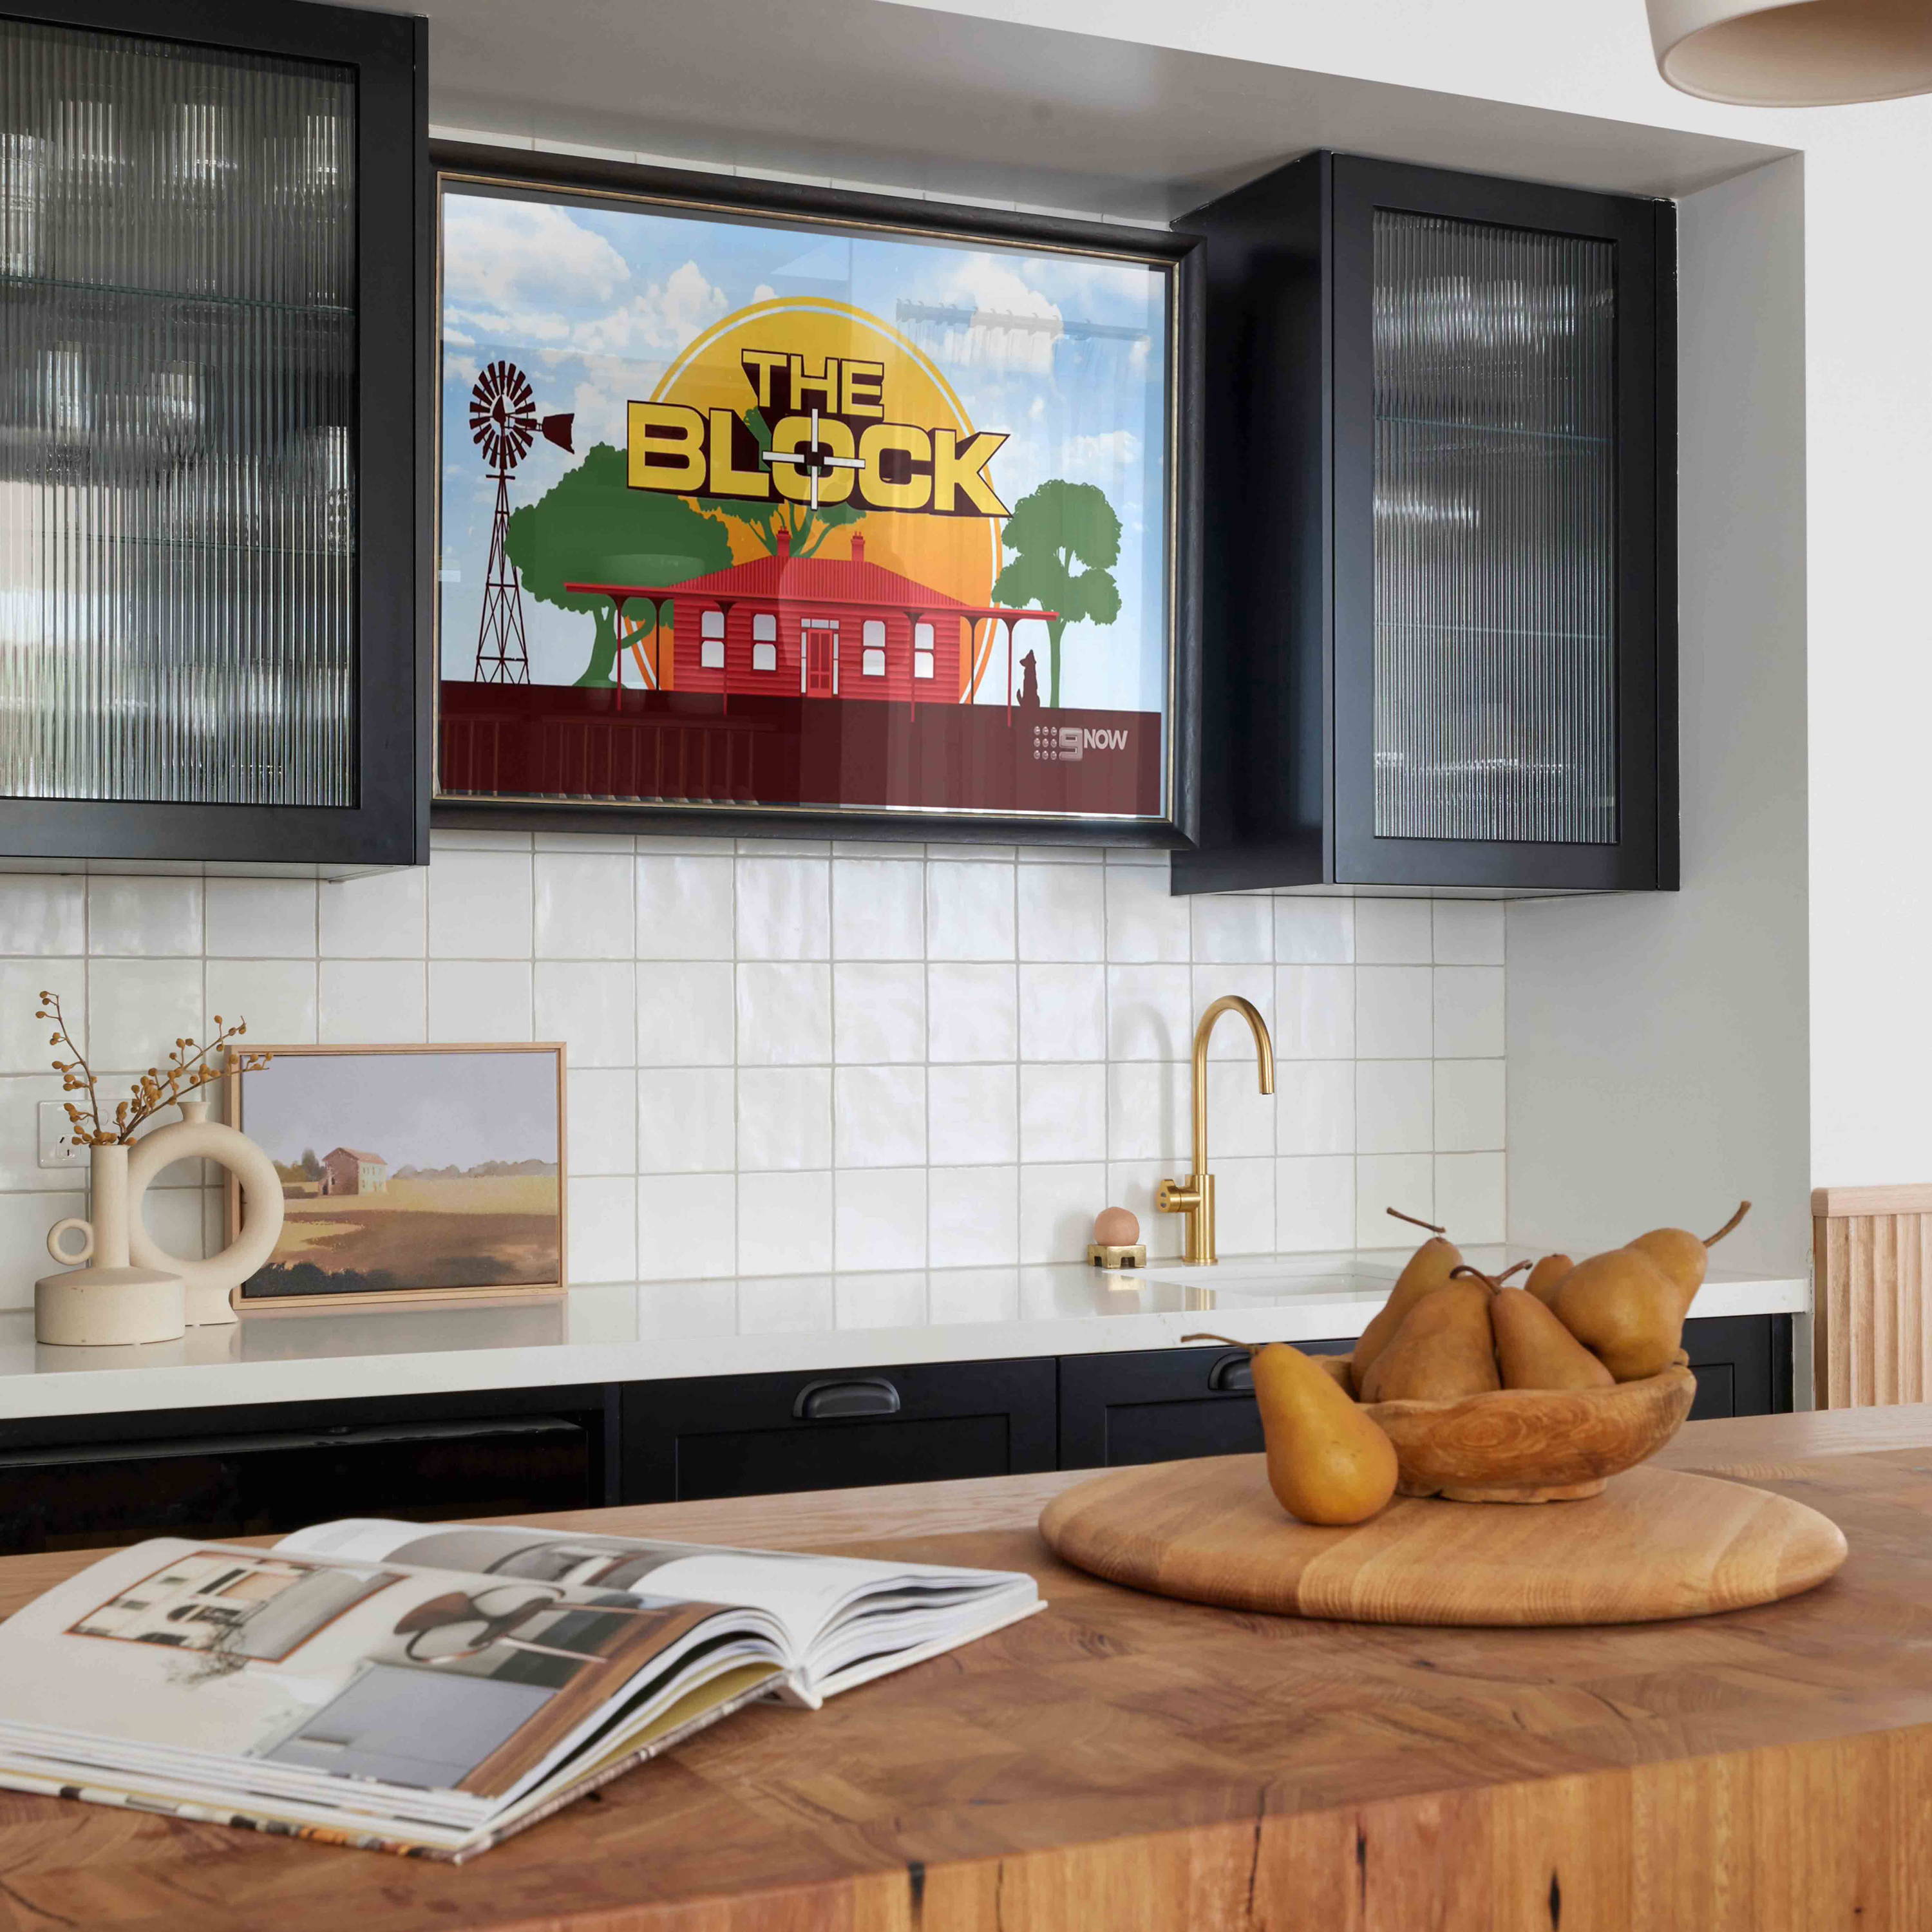 TV-Mirror in Classic Black Frame with Pewter Detail by FRAMING TO A T - A TV-Mirror in the kitchen in a black contemporary frame